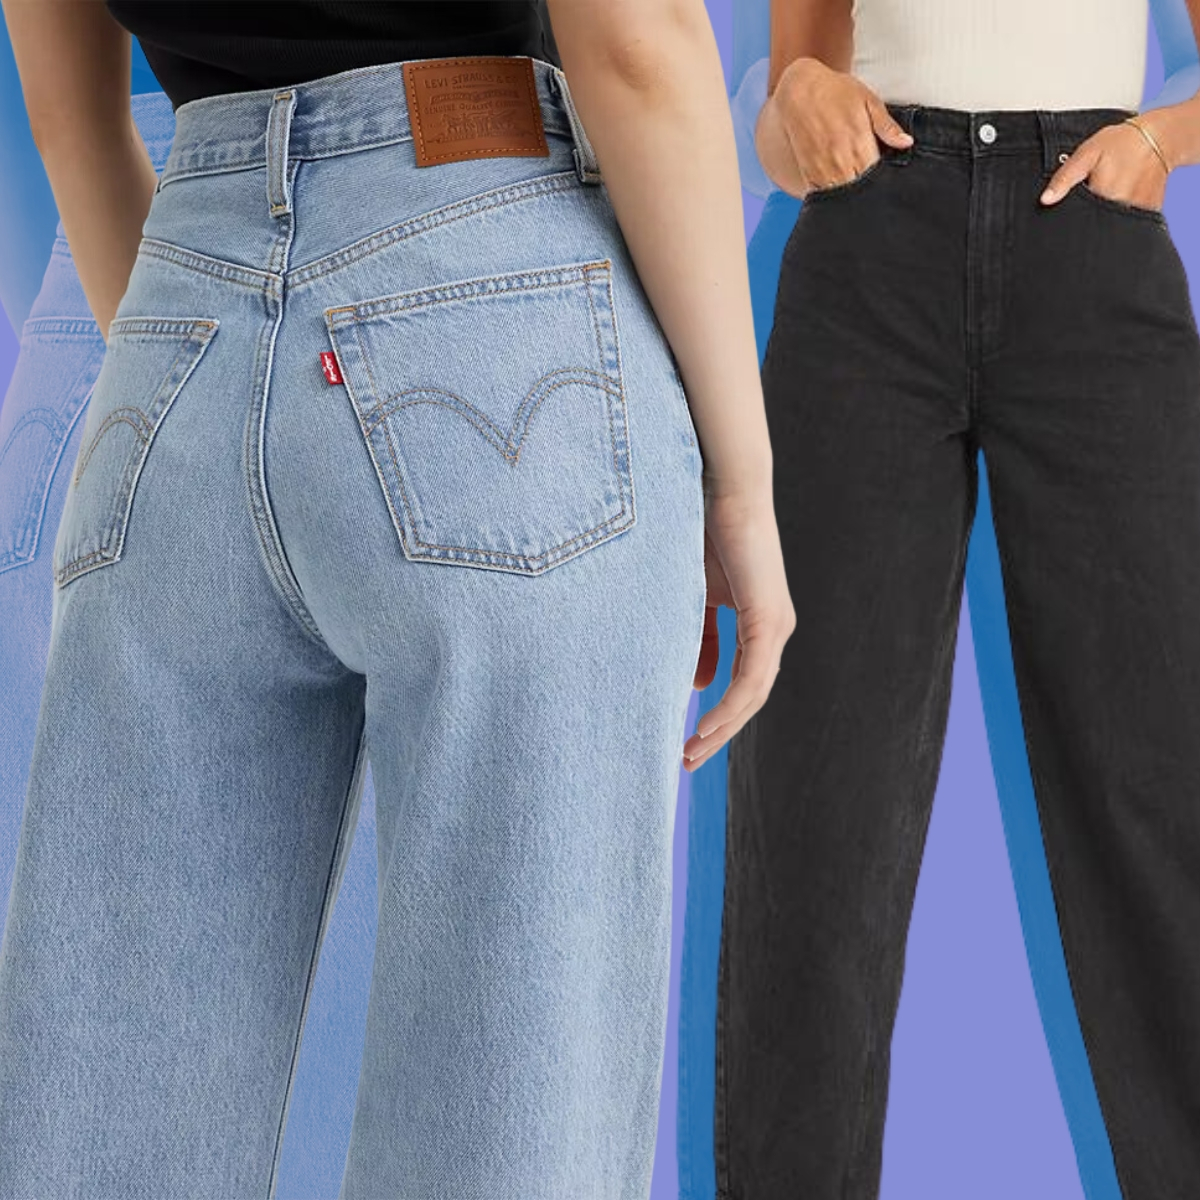 The Complete Wide Leg Jeans Guide for Petite Women - Petite Dressing